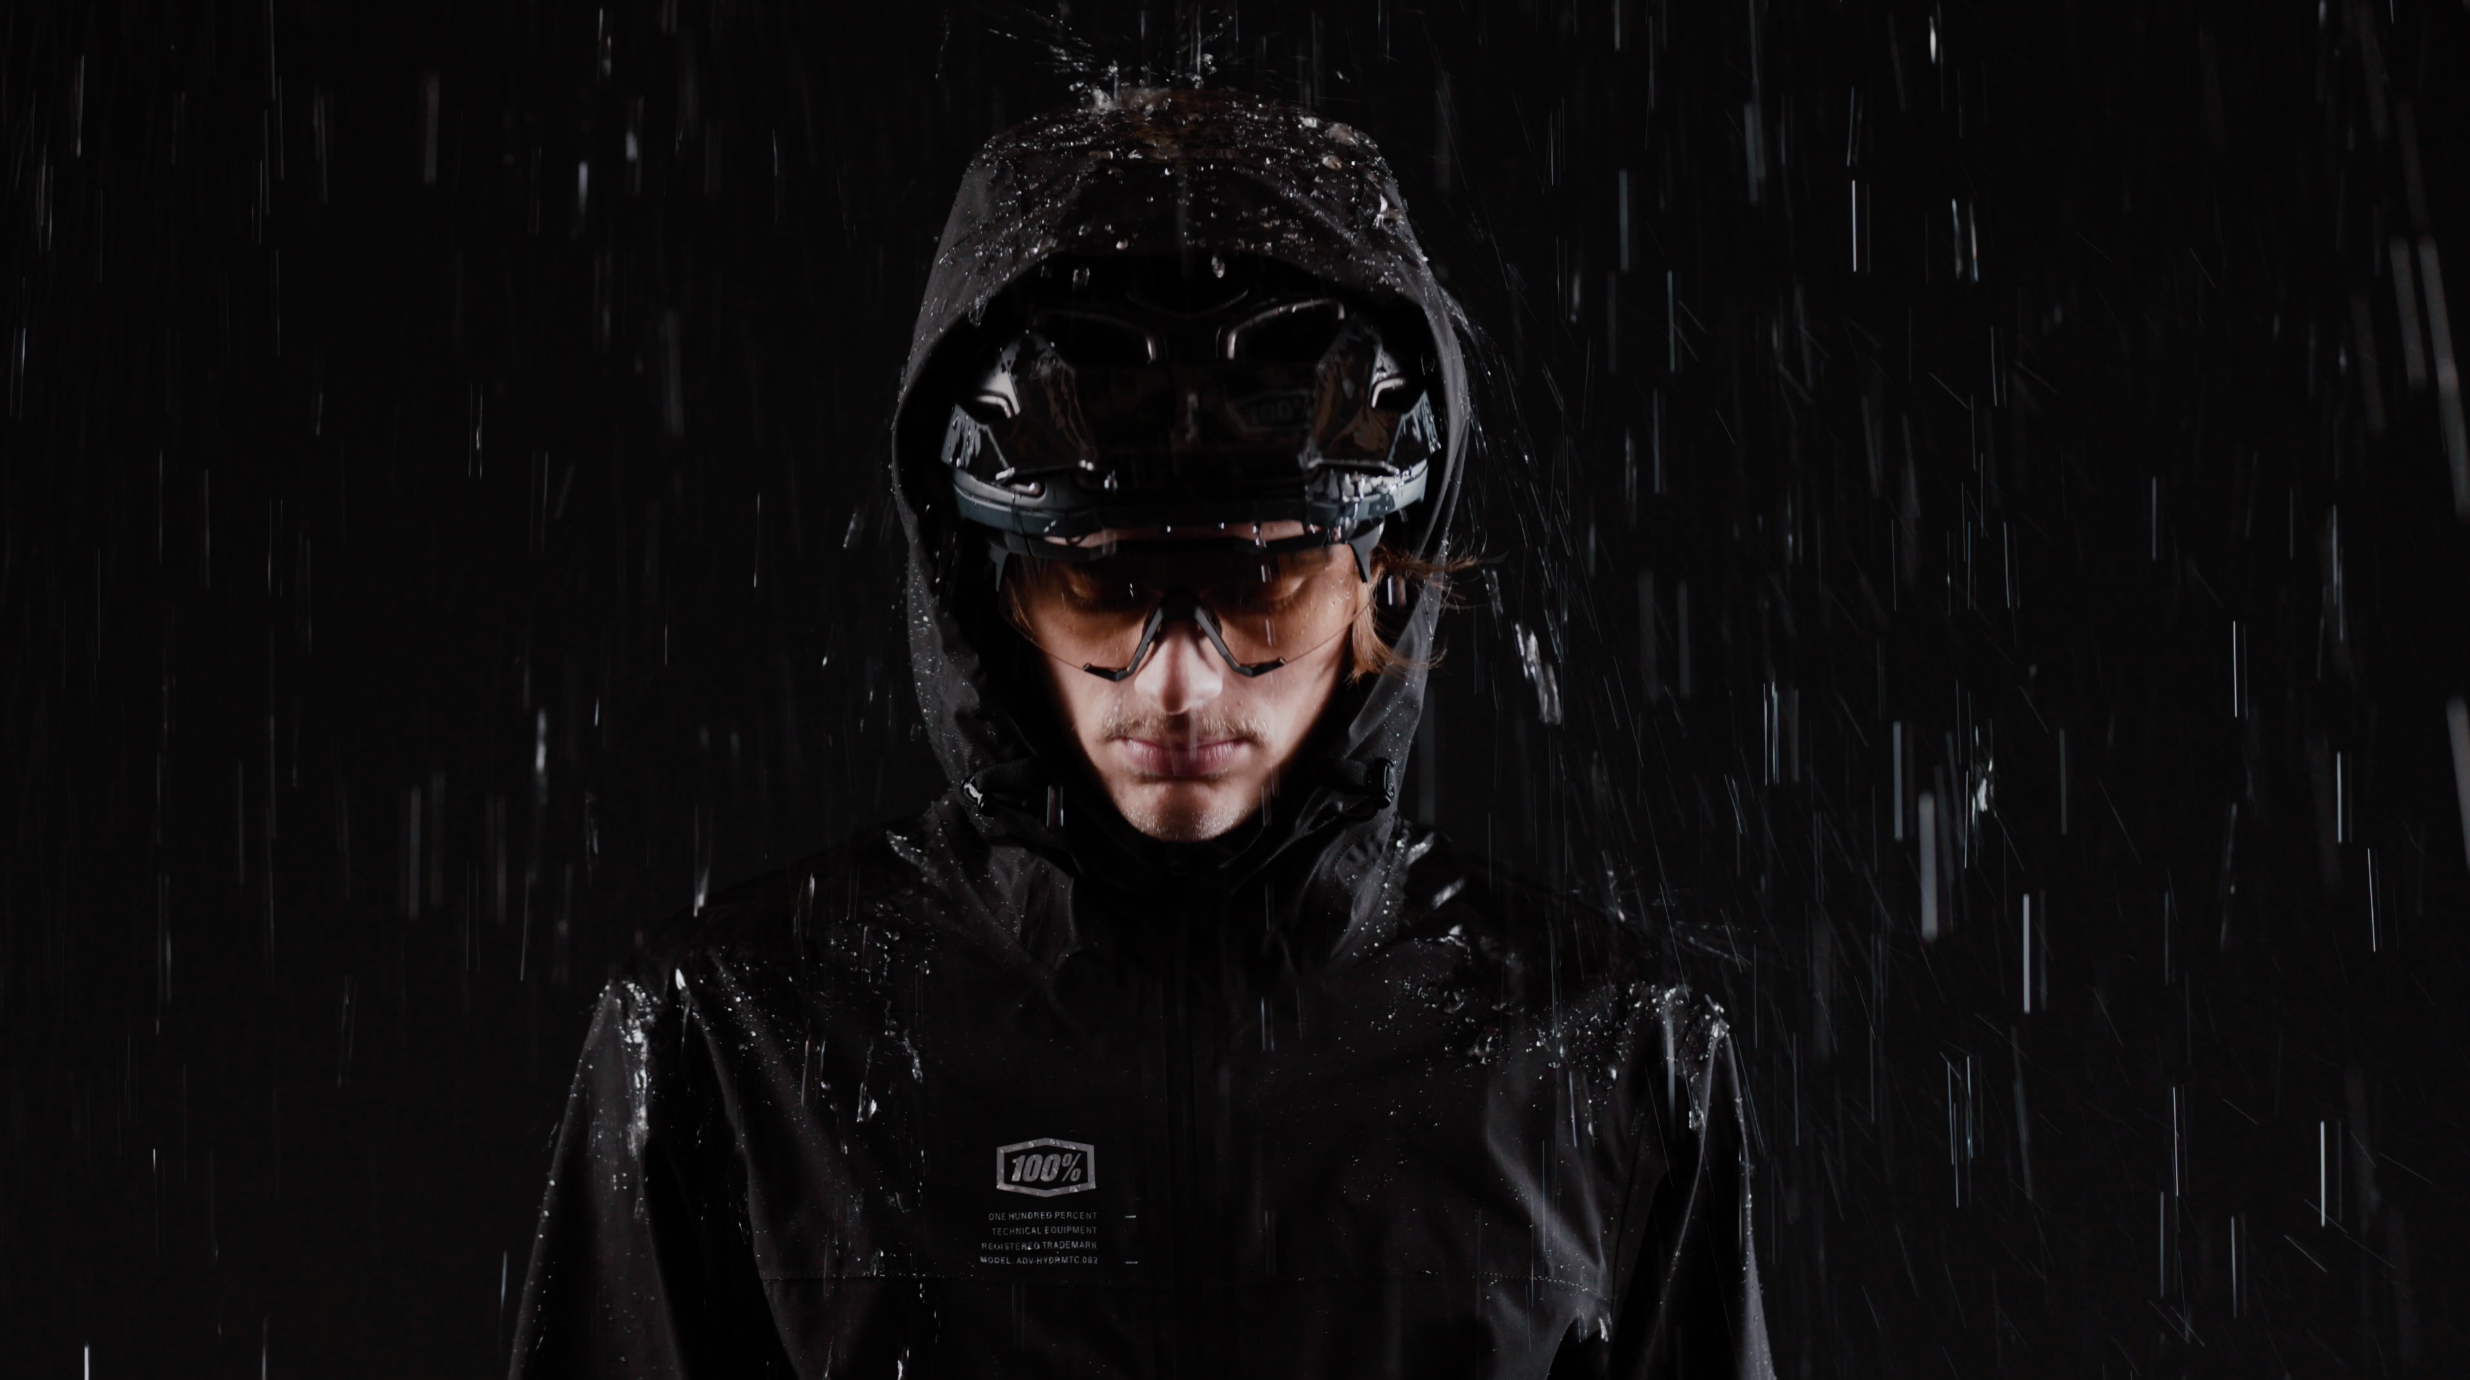 The Fully Waterproof HYDROMATIC MTB Collection